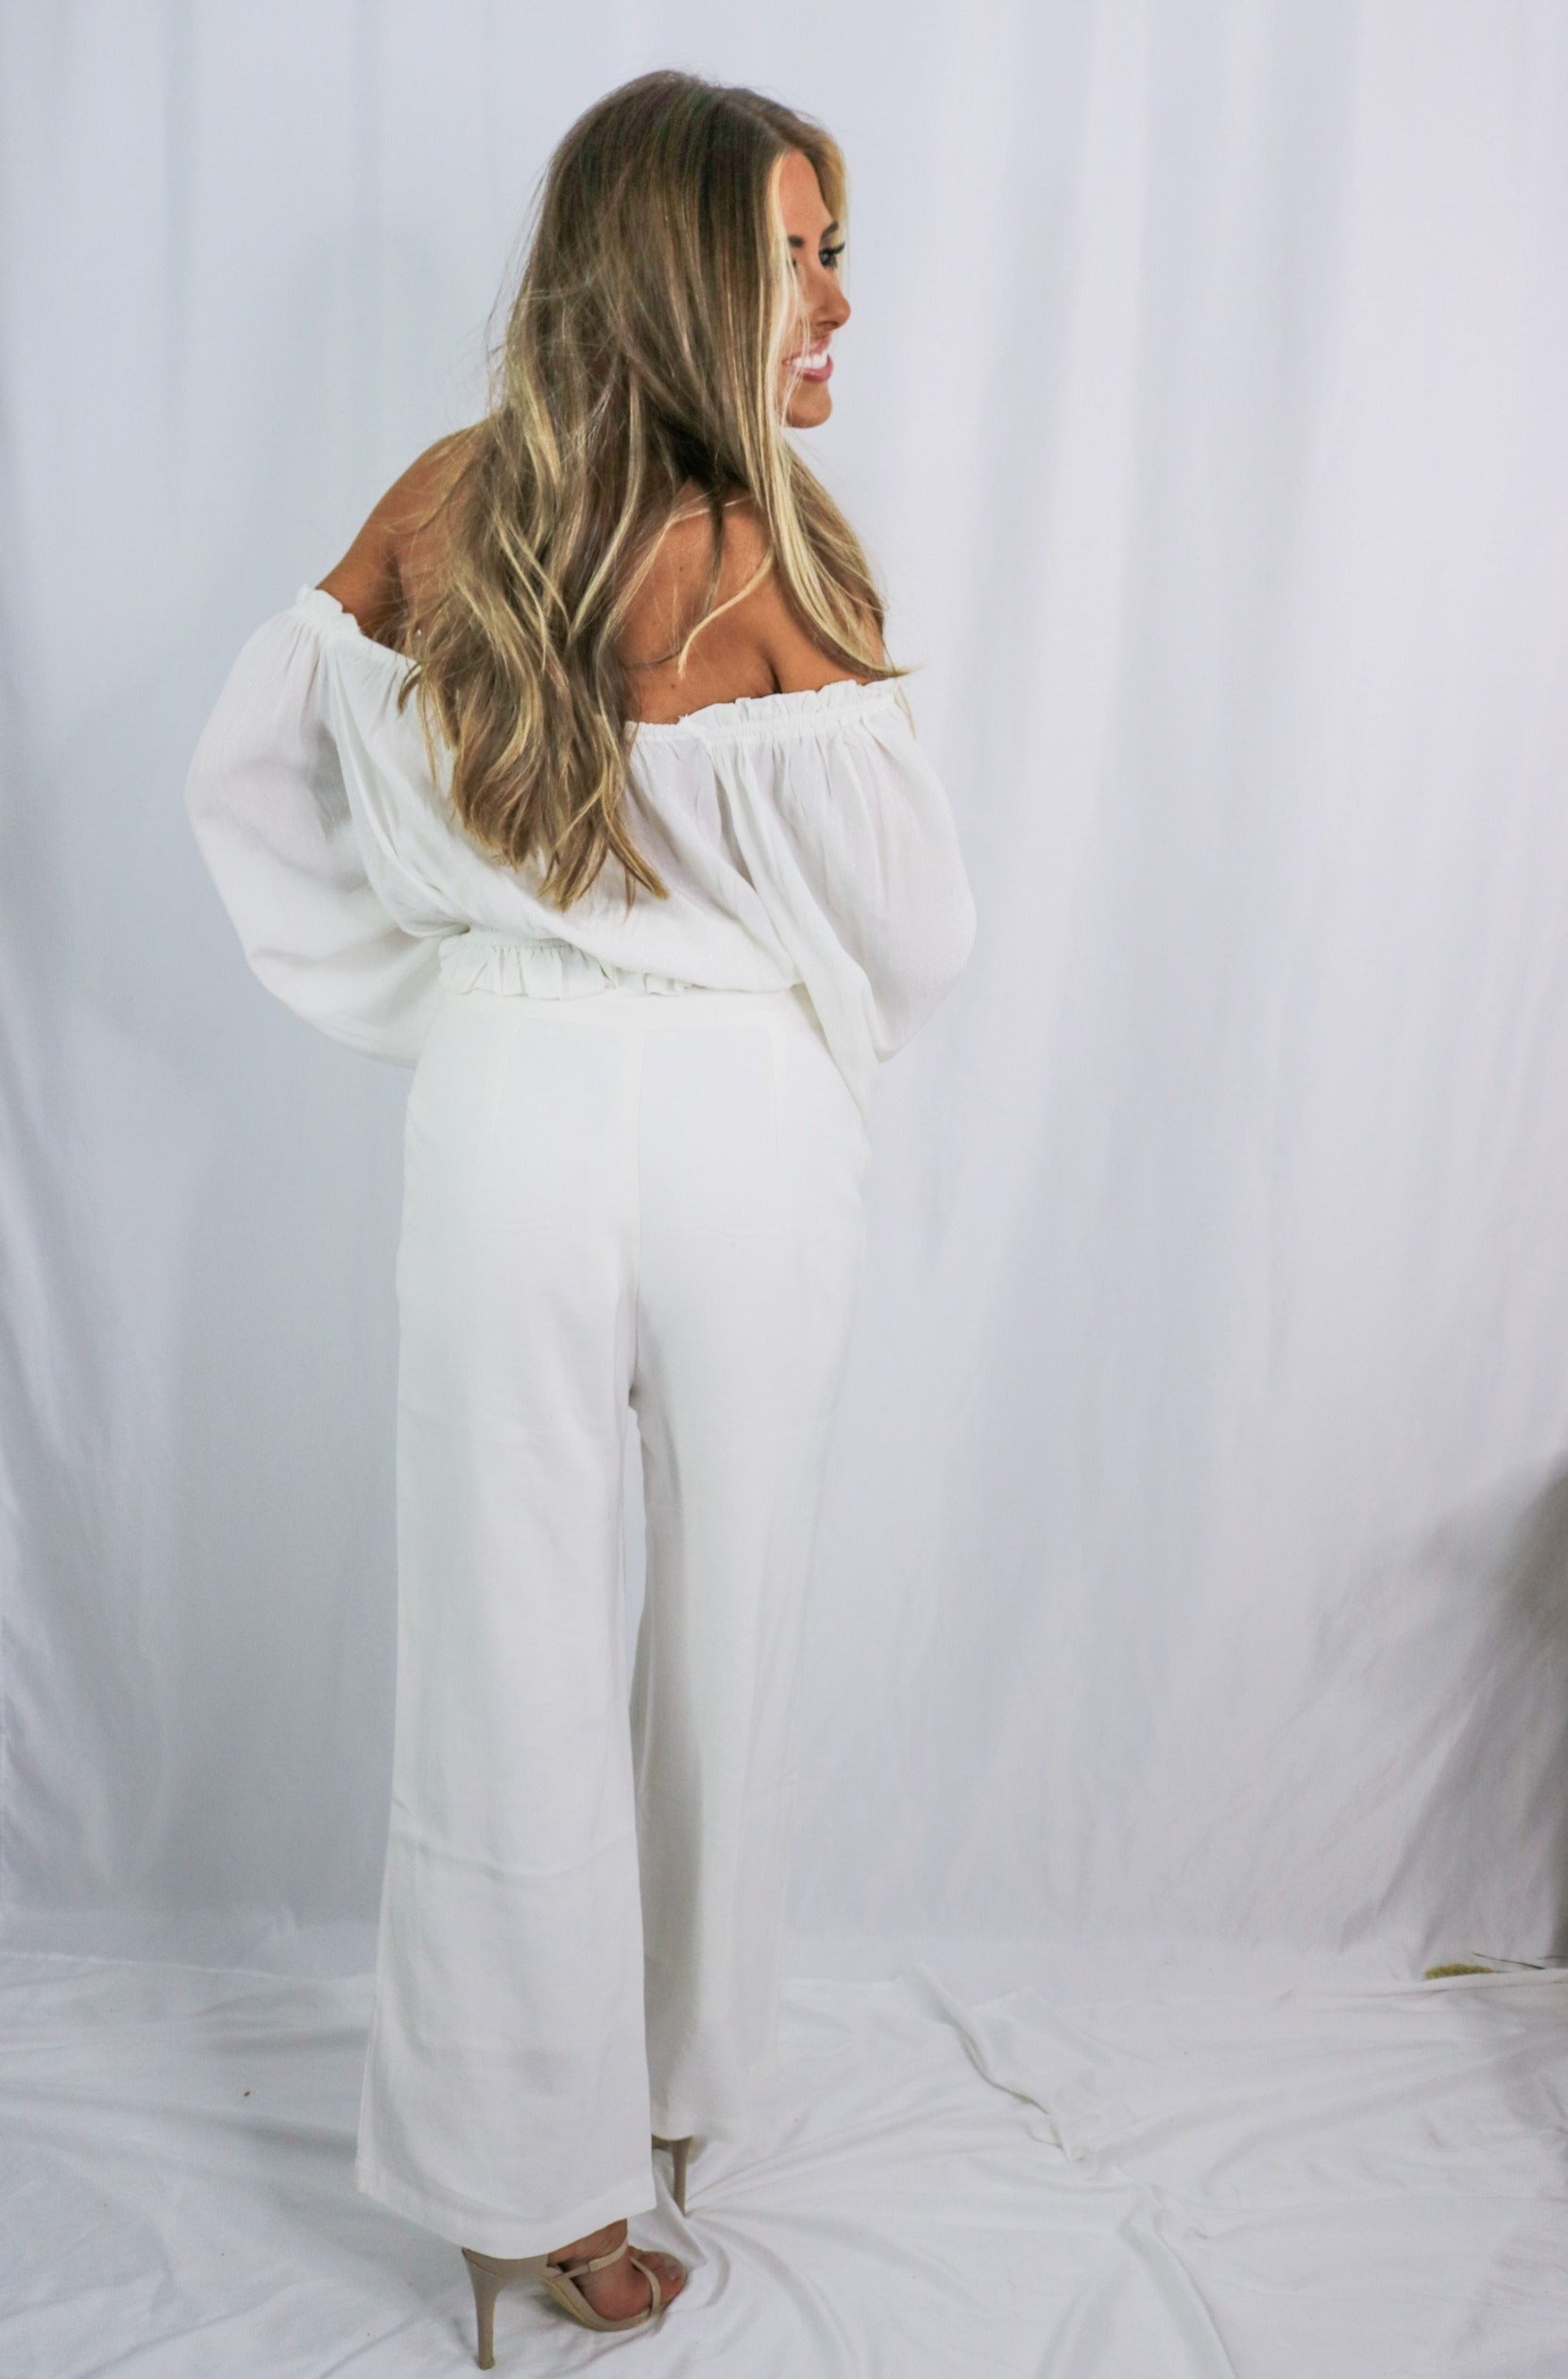 Blonde girl models an off the shoulder frilled blouse in white for Scarlette The Label, an online fashion boutique for women. Paired with white, wide-leg pants.